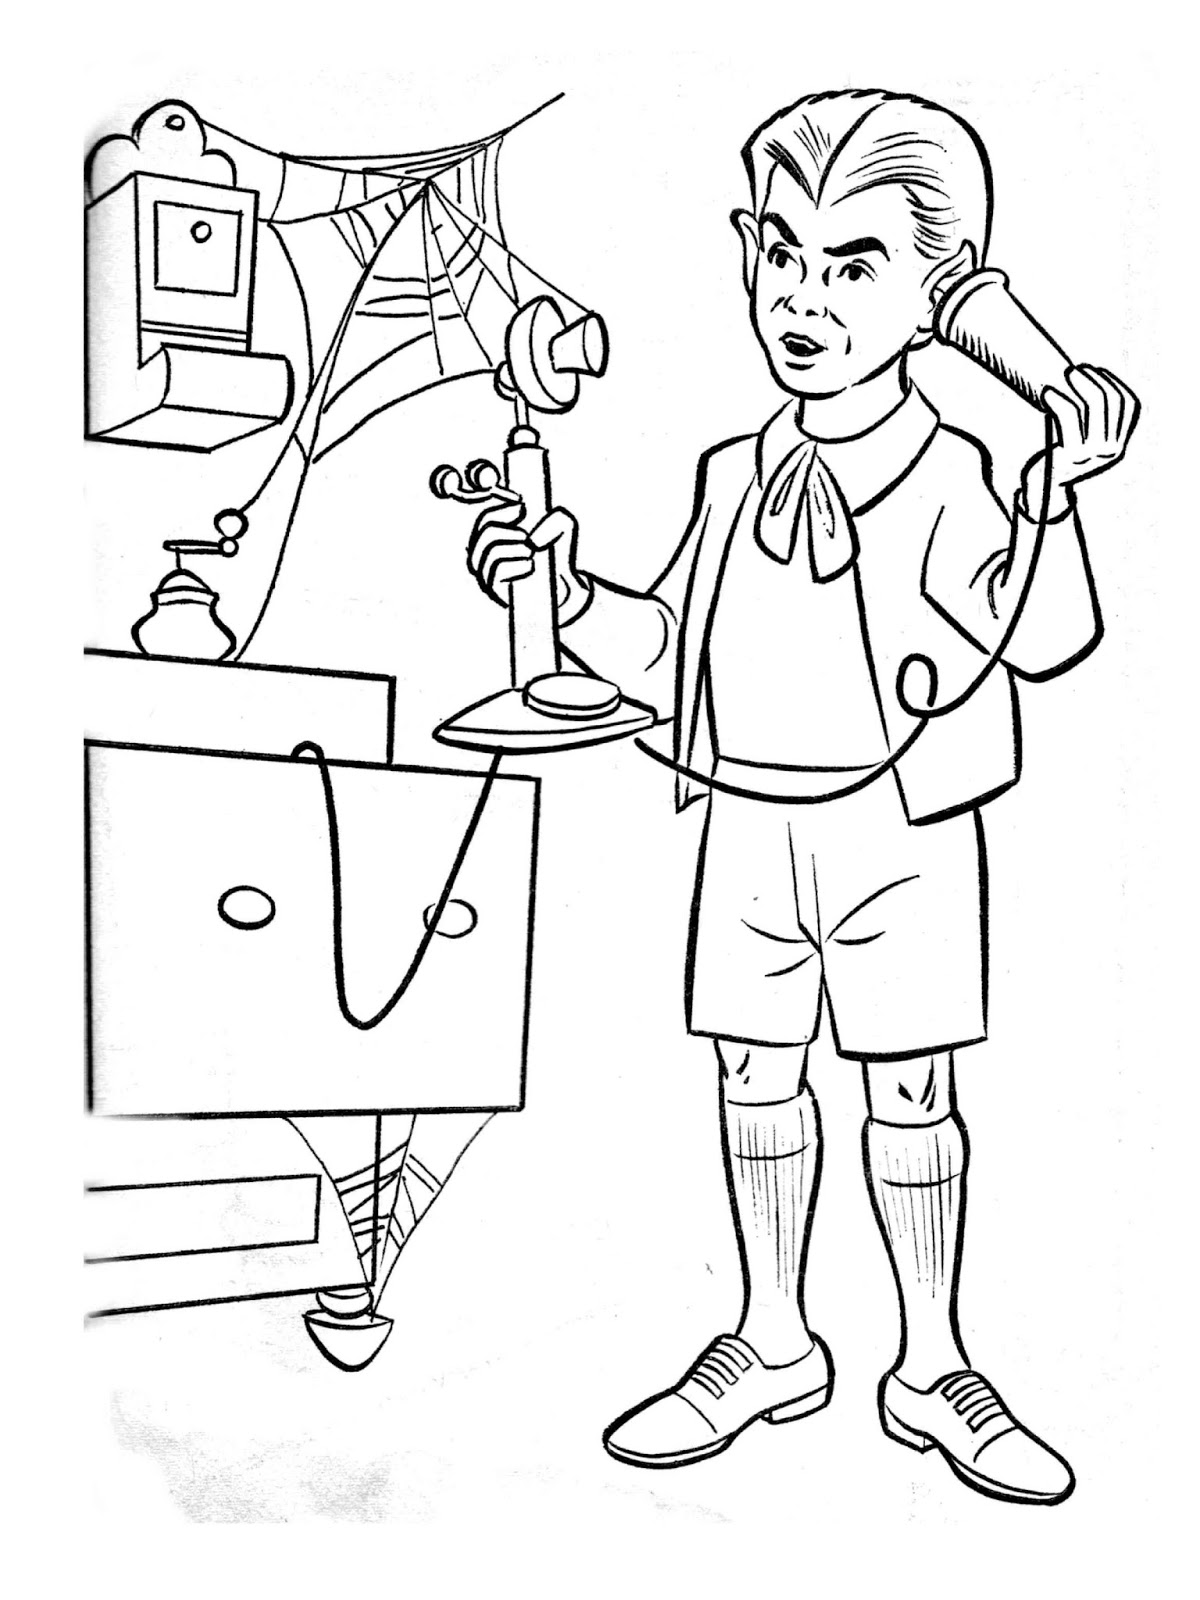 o ween coloring pages - photo #41